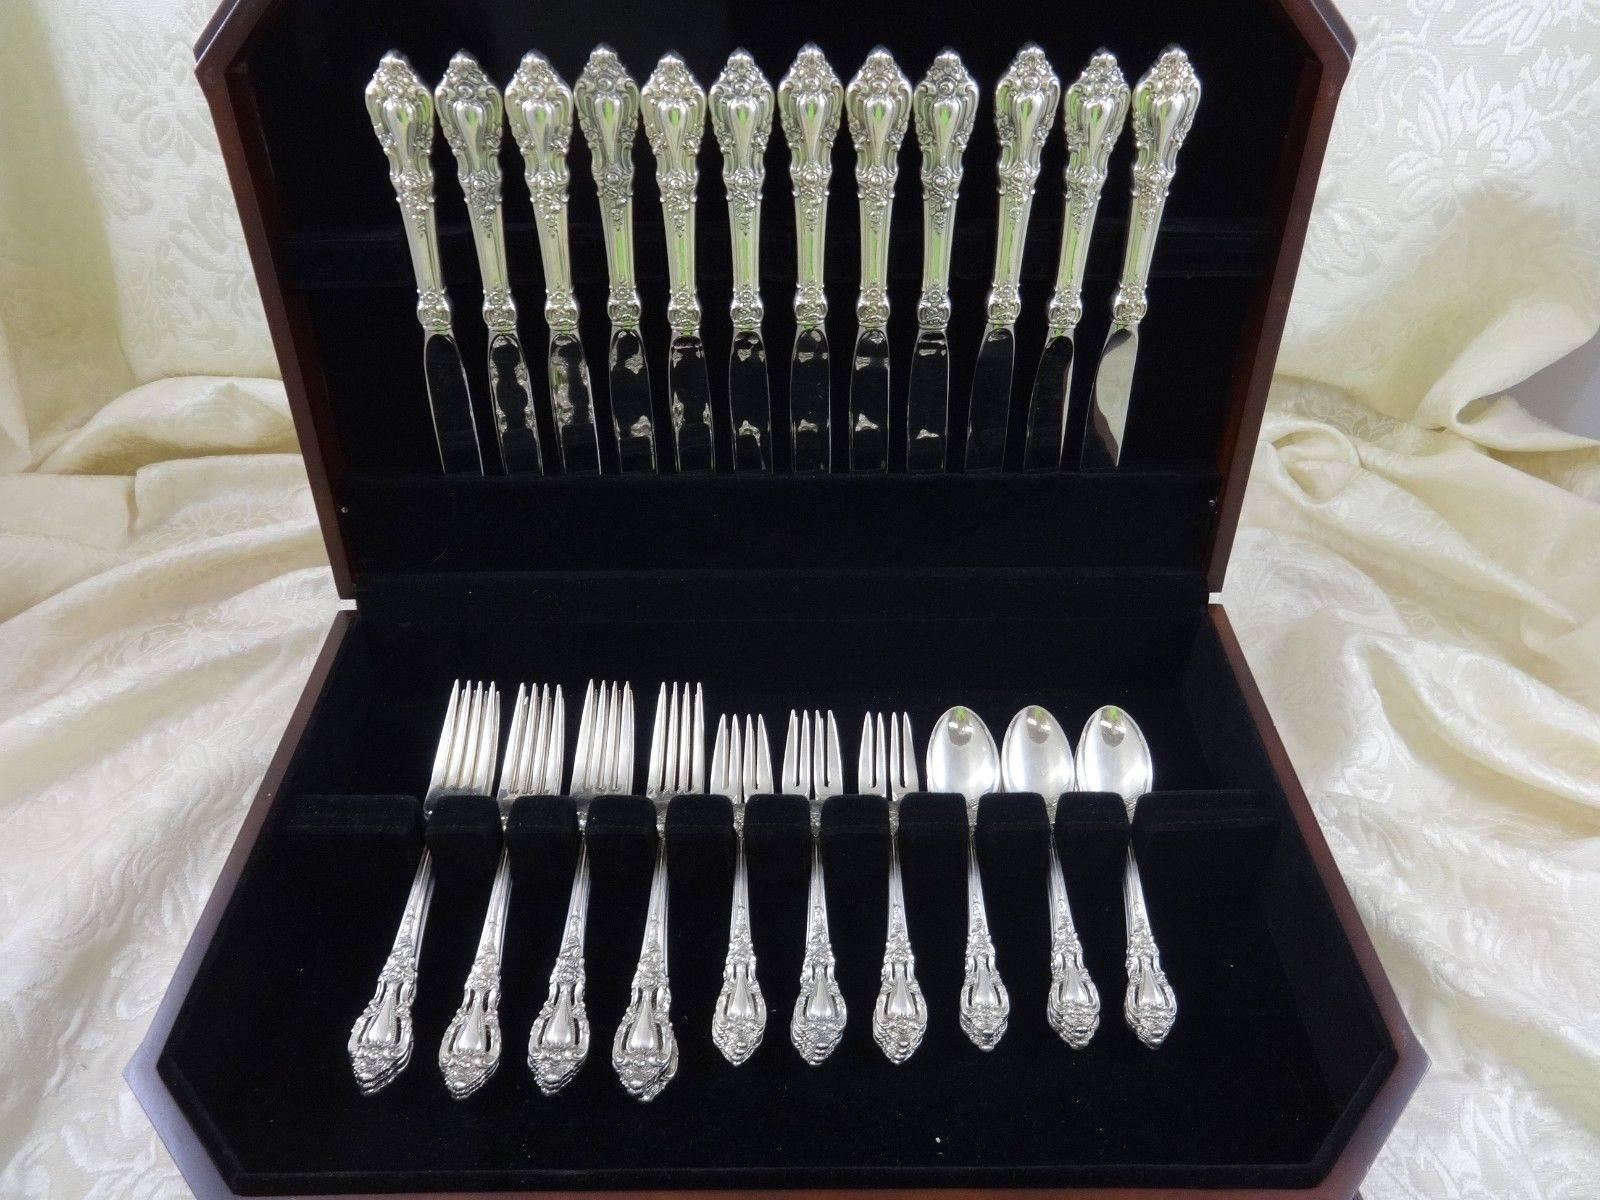 Eloquence by Lunt sterling silver flatware set - - 48 piece true dinner size set, in excellent condition. This set includes: 

12 dinner size knives, 9 3/4